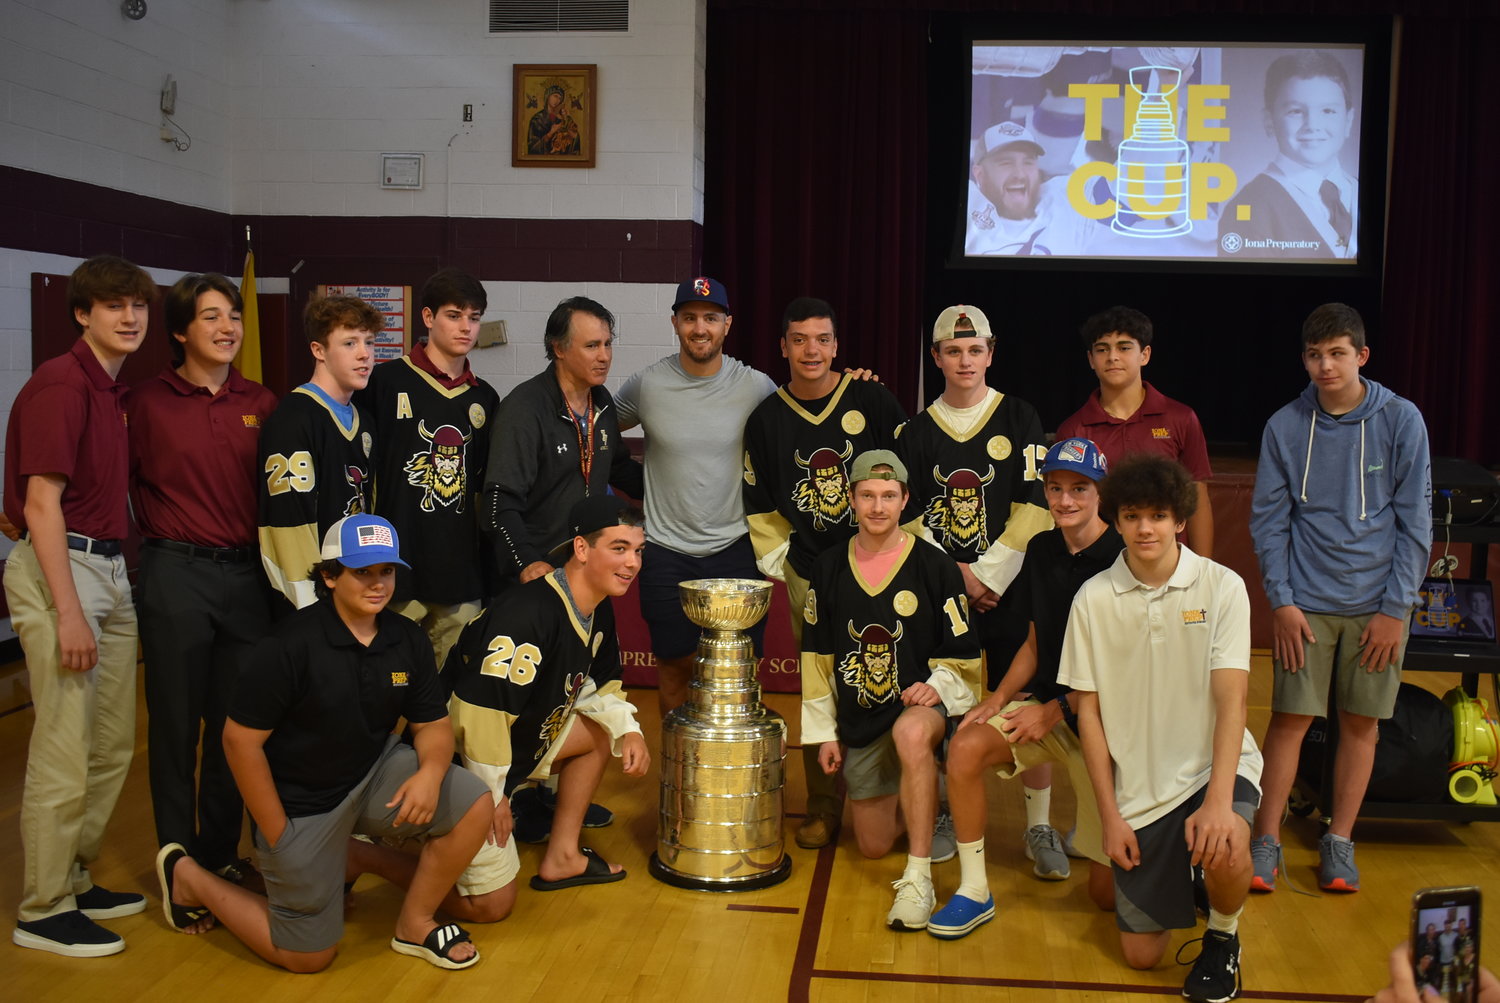 Kevin Shattenkirk, a member of the 2020 Stanley Cup Champion Tampa Bay Lightning, stands in a photo with the Stanley Cup and members of Iona Prep's hockey program at Iona Prep's Lower School on July 17. Shattenkirk is a 2003 graduate of Iona Prep's Lower School.